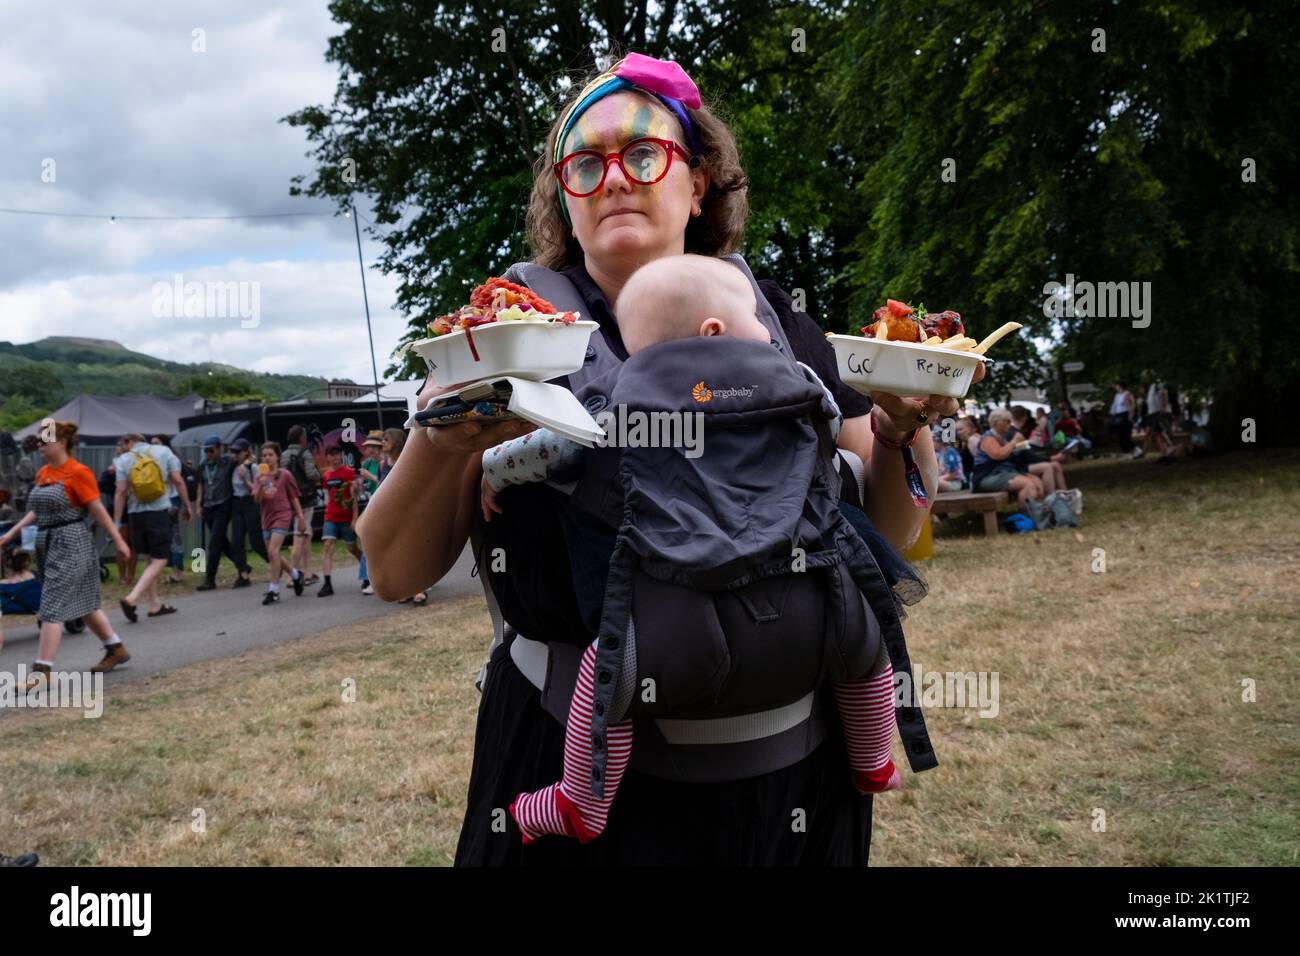 Fast food and a baby in the festival crowd at the Green Man 2022 music festival in in Wales, UK, August 2022. Photograph: Rob Watkins/Alamy Stock Photo